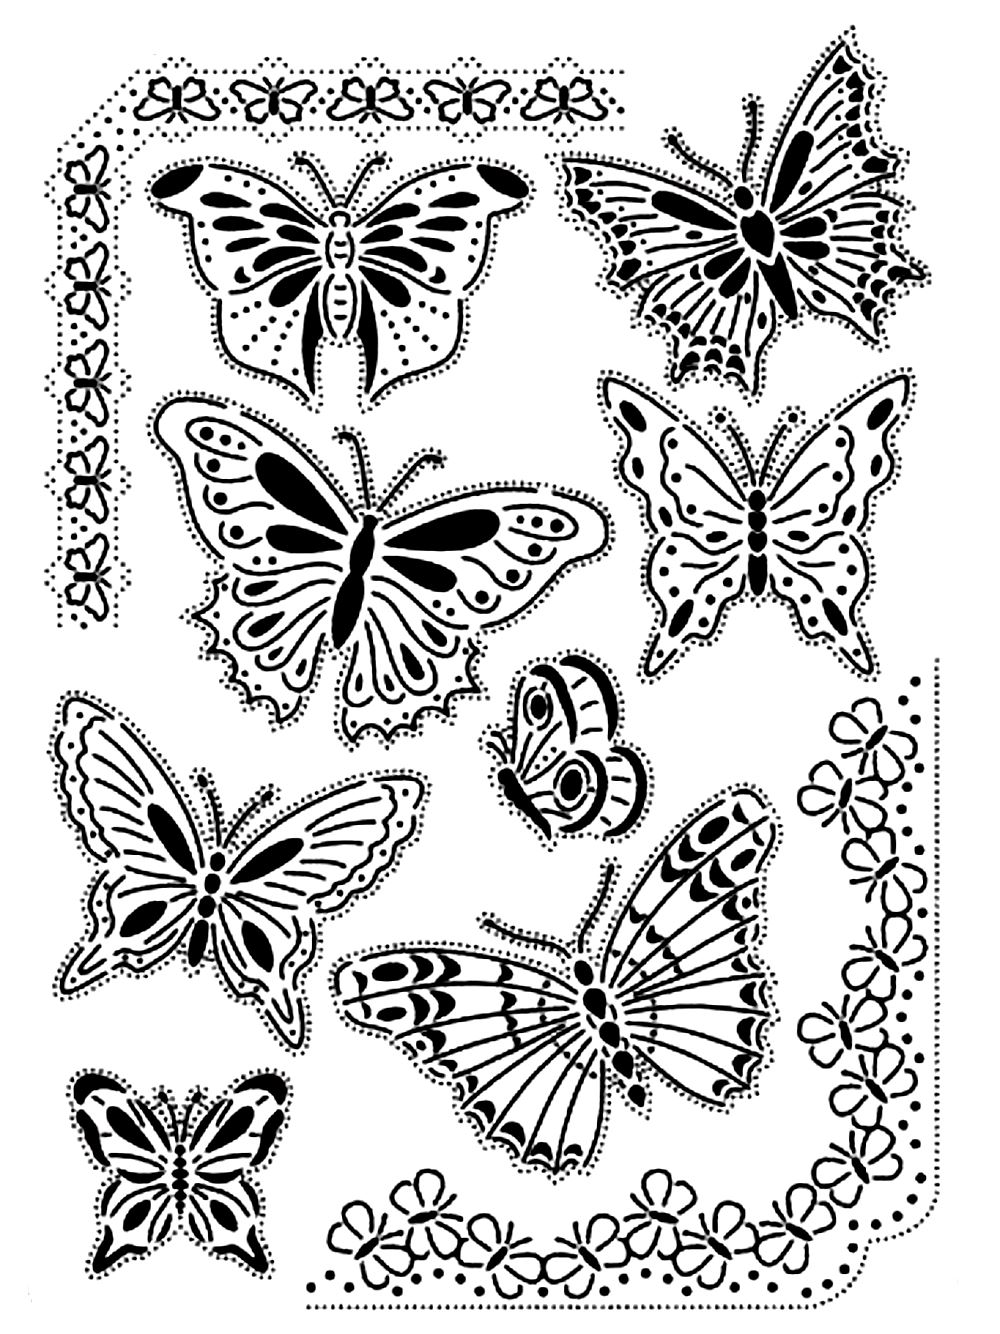 Butterflies, with a very Vintage Style ... It's up to you to chowe also vintage colors !